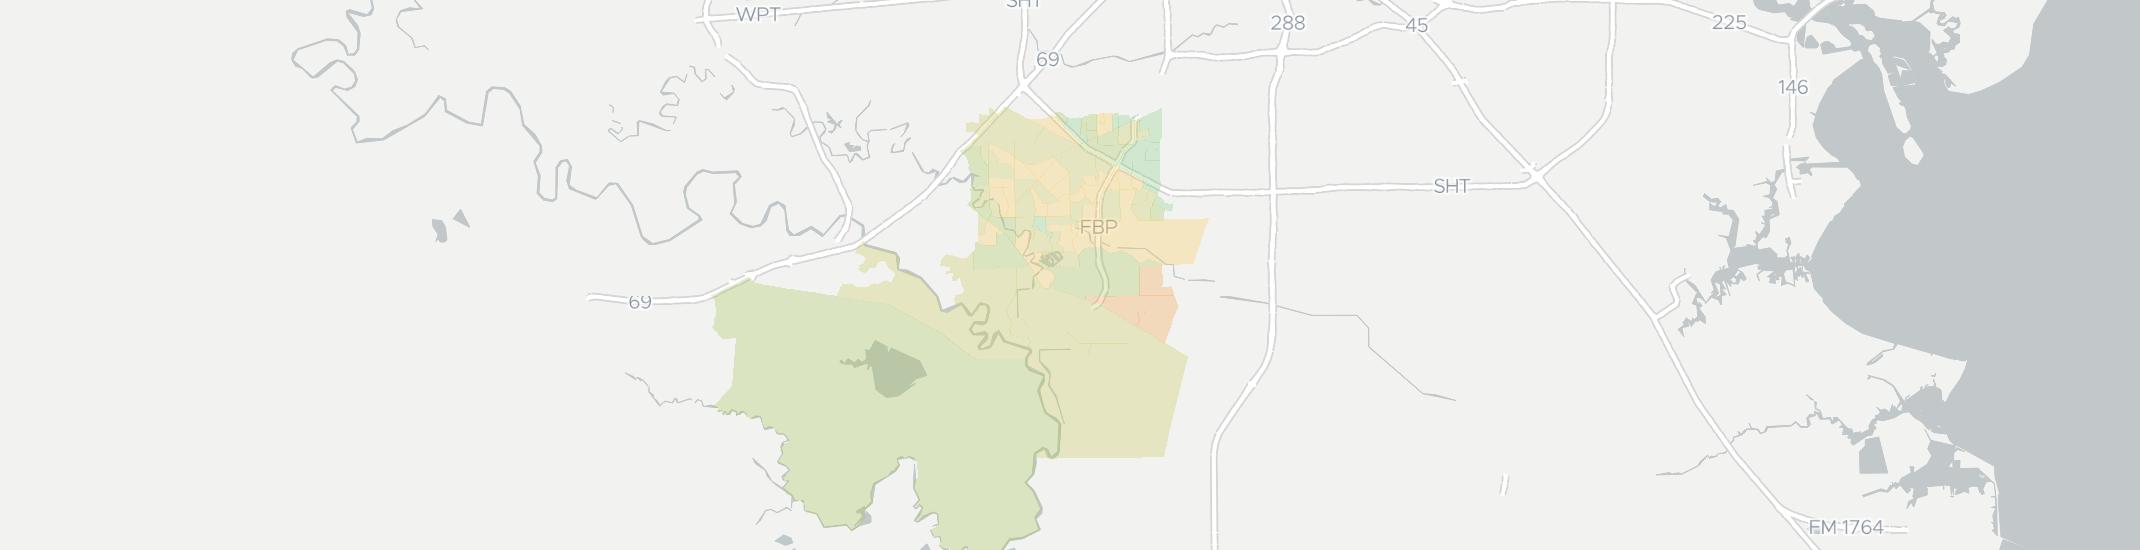 Missouri City Internet Competition Map. Click for interactive map